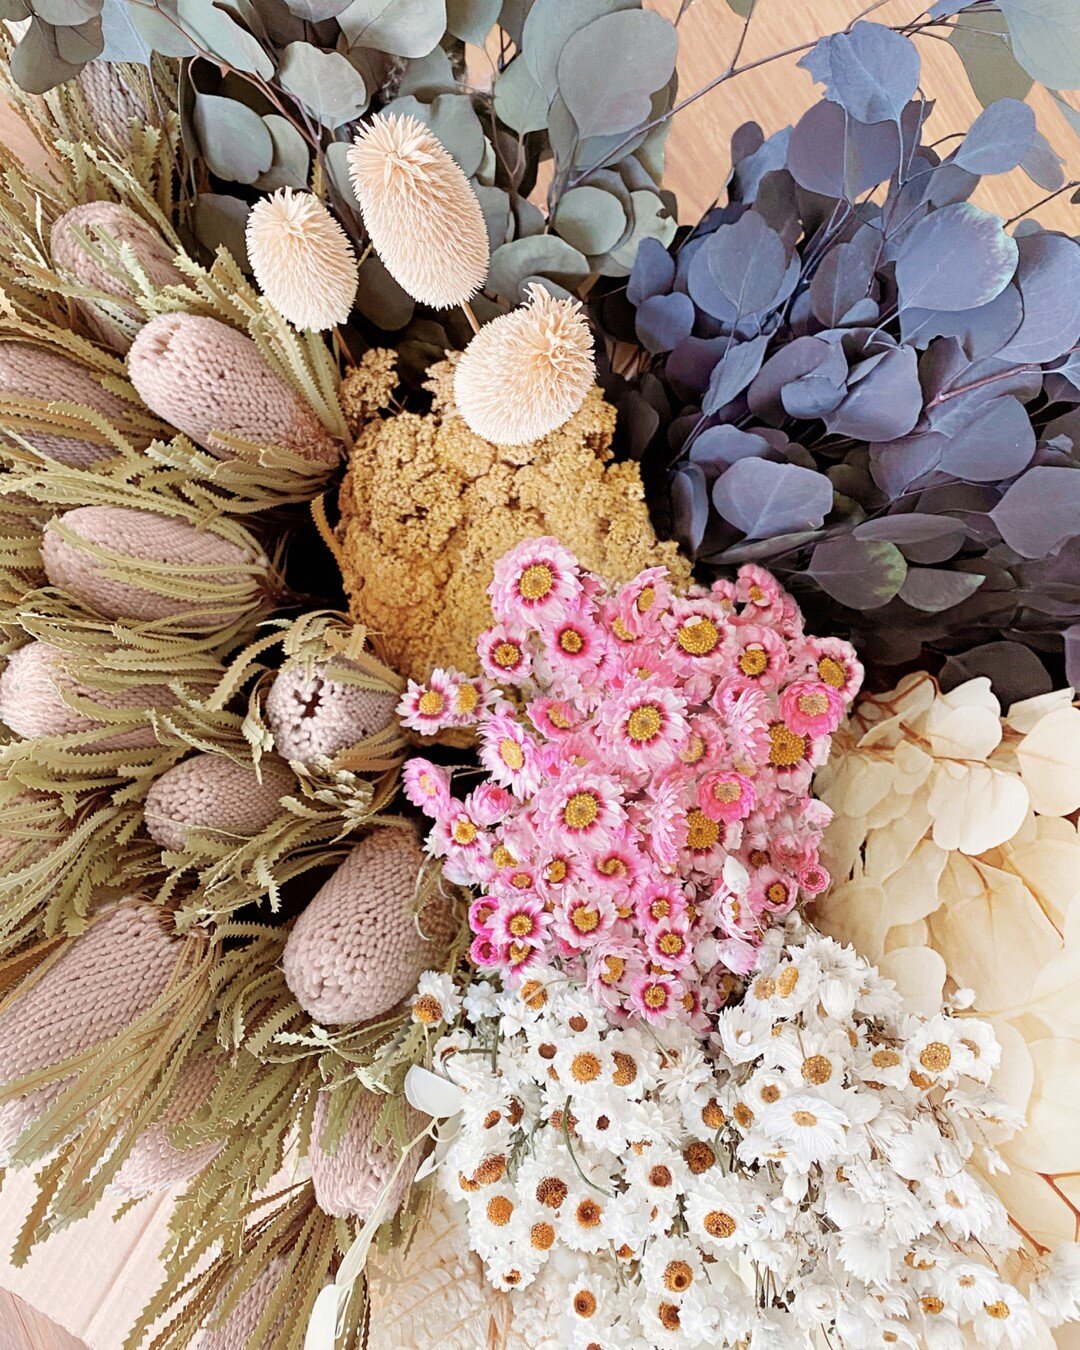 A box full of dried flower goodness 😍 We hand pick the dreamiest ingredients to go into all of our creations!⠀⠀⠀⠀⠀⠀⠀⠀⠀
⠀⠀⠀⠀⠀⠀⠀⠀⠀
Dried and preserved flowers come in a wide variety of beautiful colours and styles so the possibilities really are endle